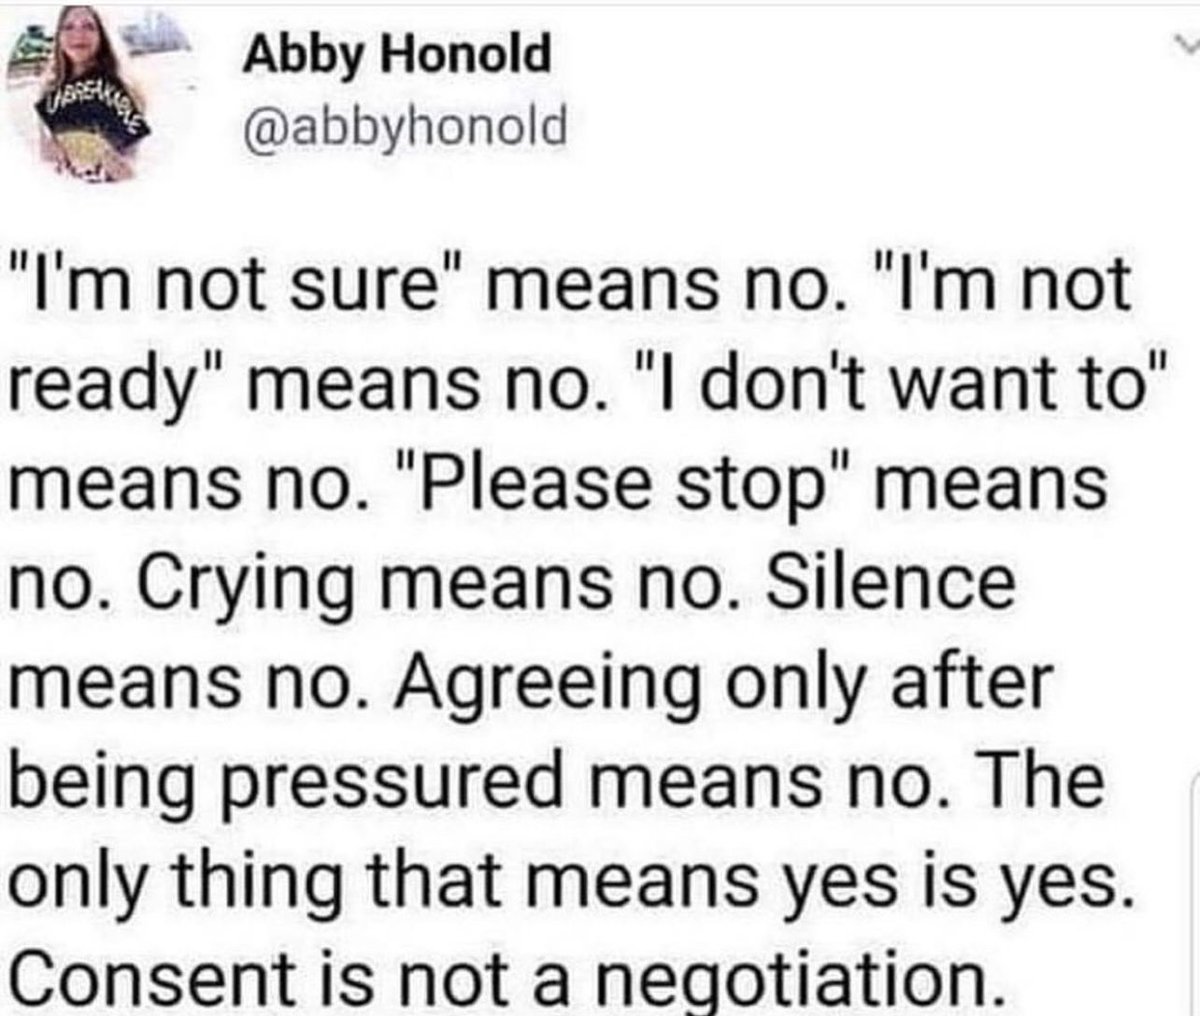 Many survivors wonder whether their experiences or feelings are valid because they “eventually gave in and allowed it”…
⁠⁠
This is not consent.⁠⁠

Consent is not a Negotiation.

#Consent #SexualViolence #WARIF #childsexualabuse  #believesurvivors  #supportsurvivors